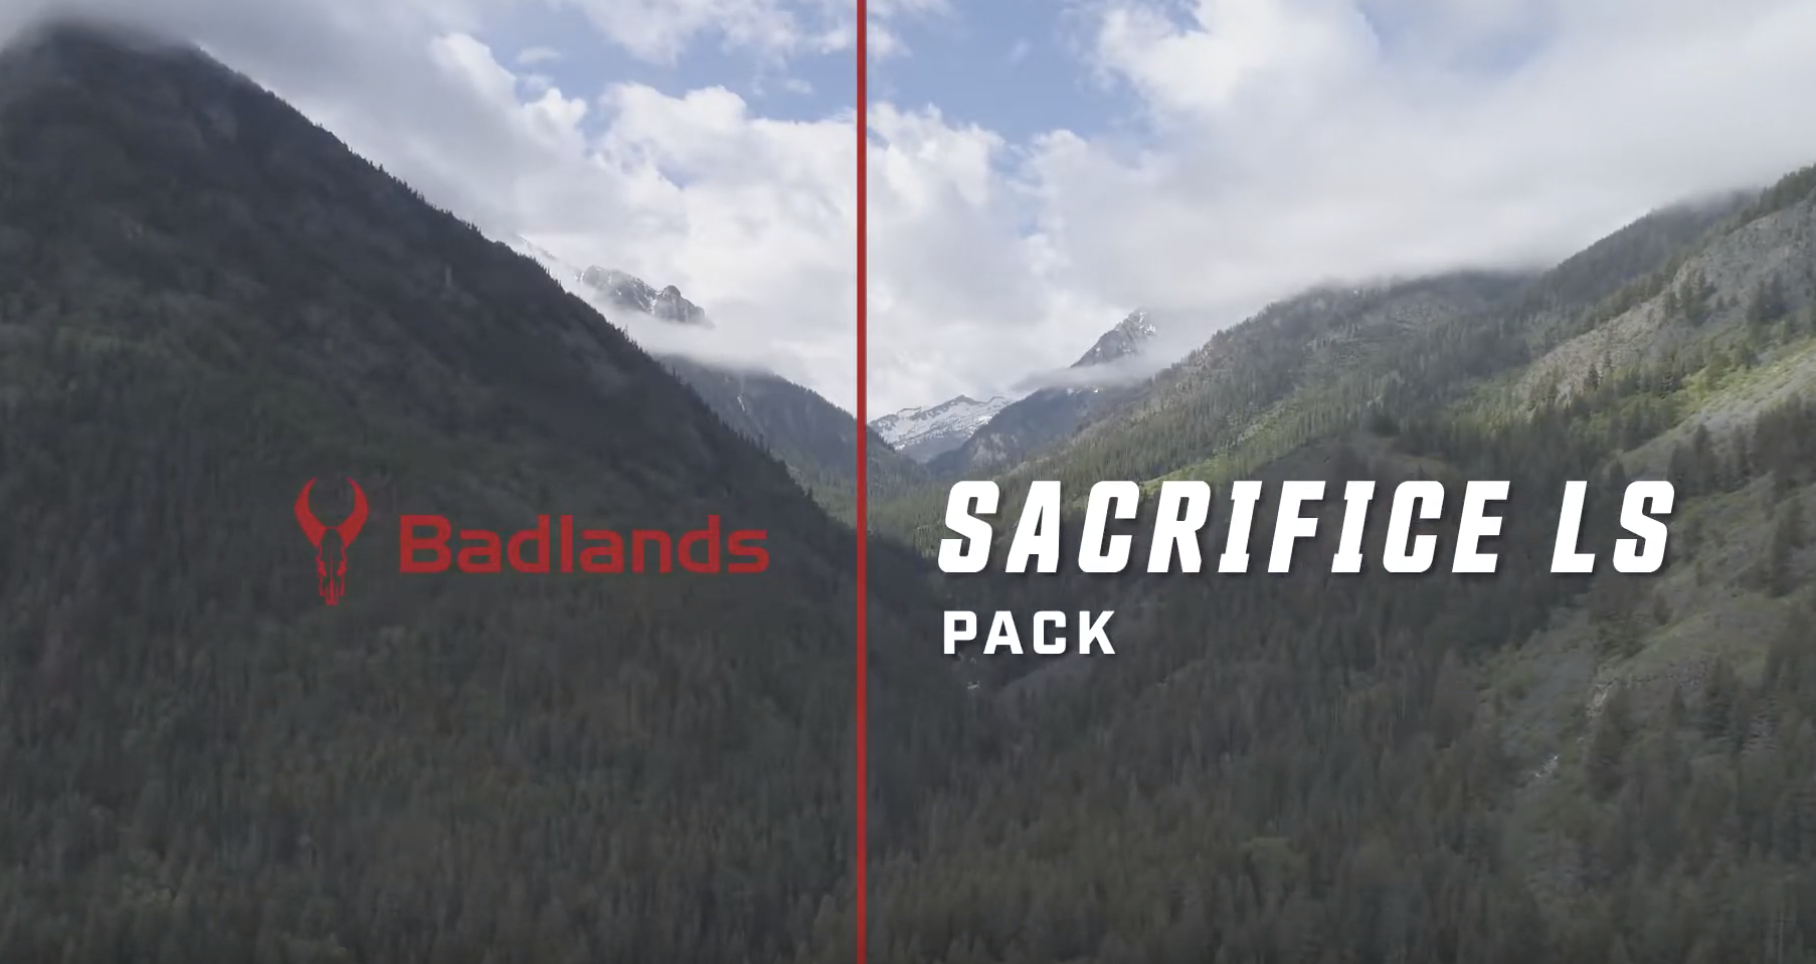 Learn more about the Sacrifice LS Pack